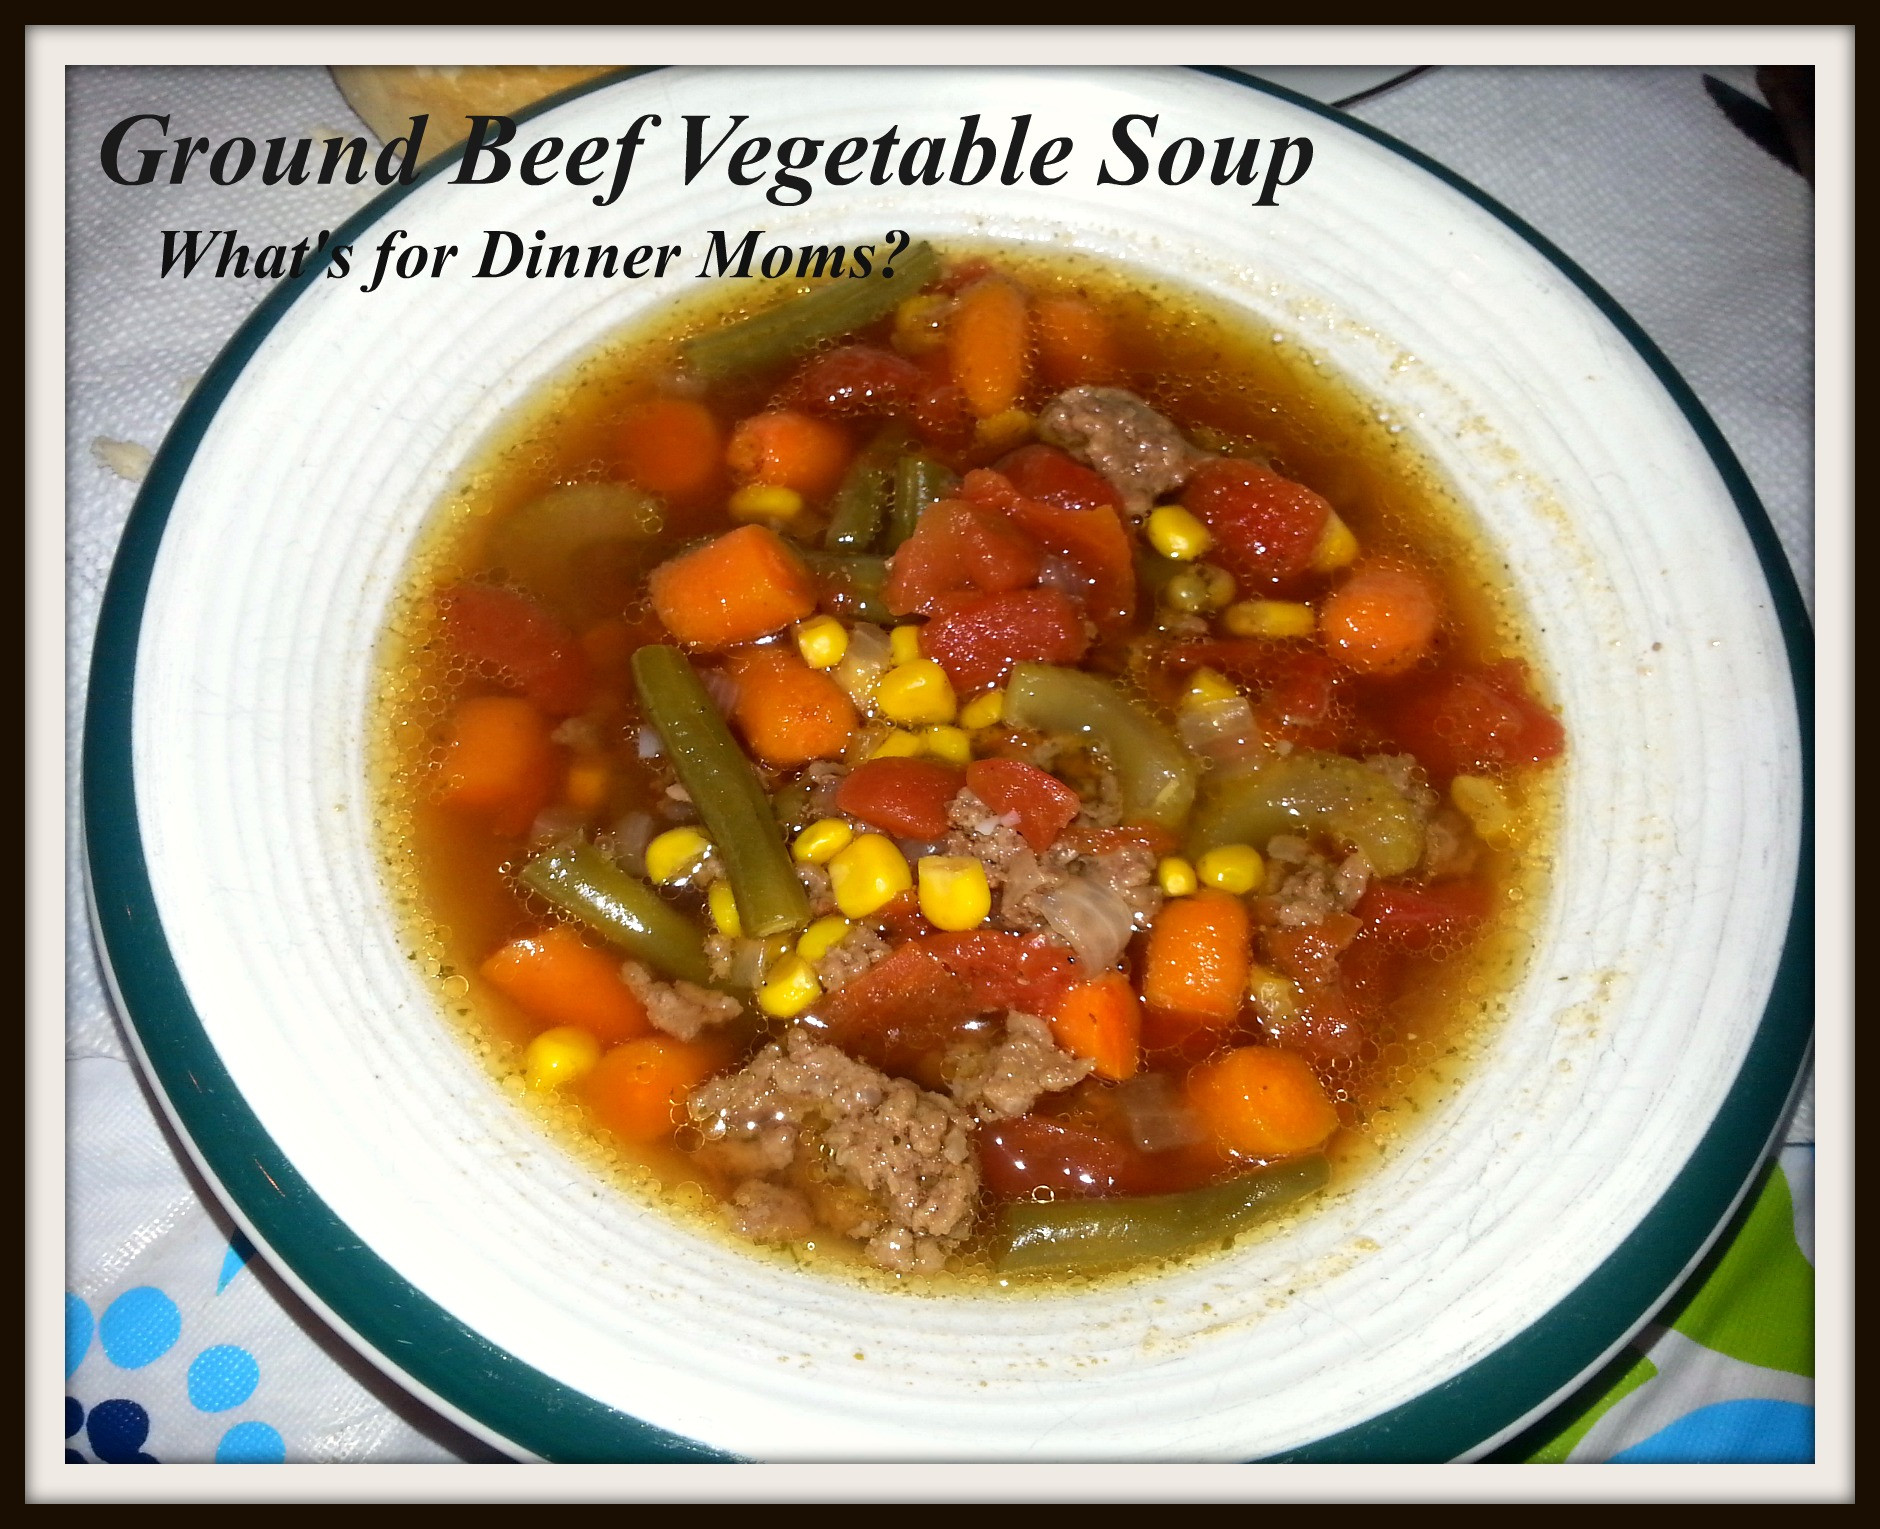 Ground Beef Vegetable Soup
 Ve able Soup with Ground Beef – What s for Dinner Moms